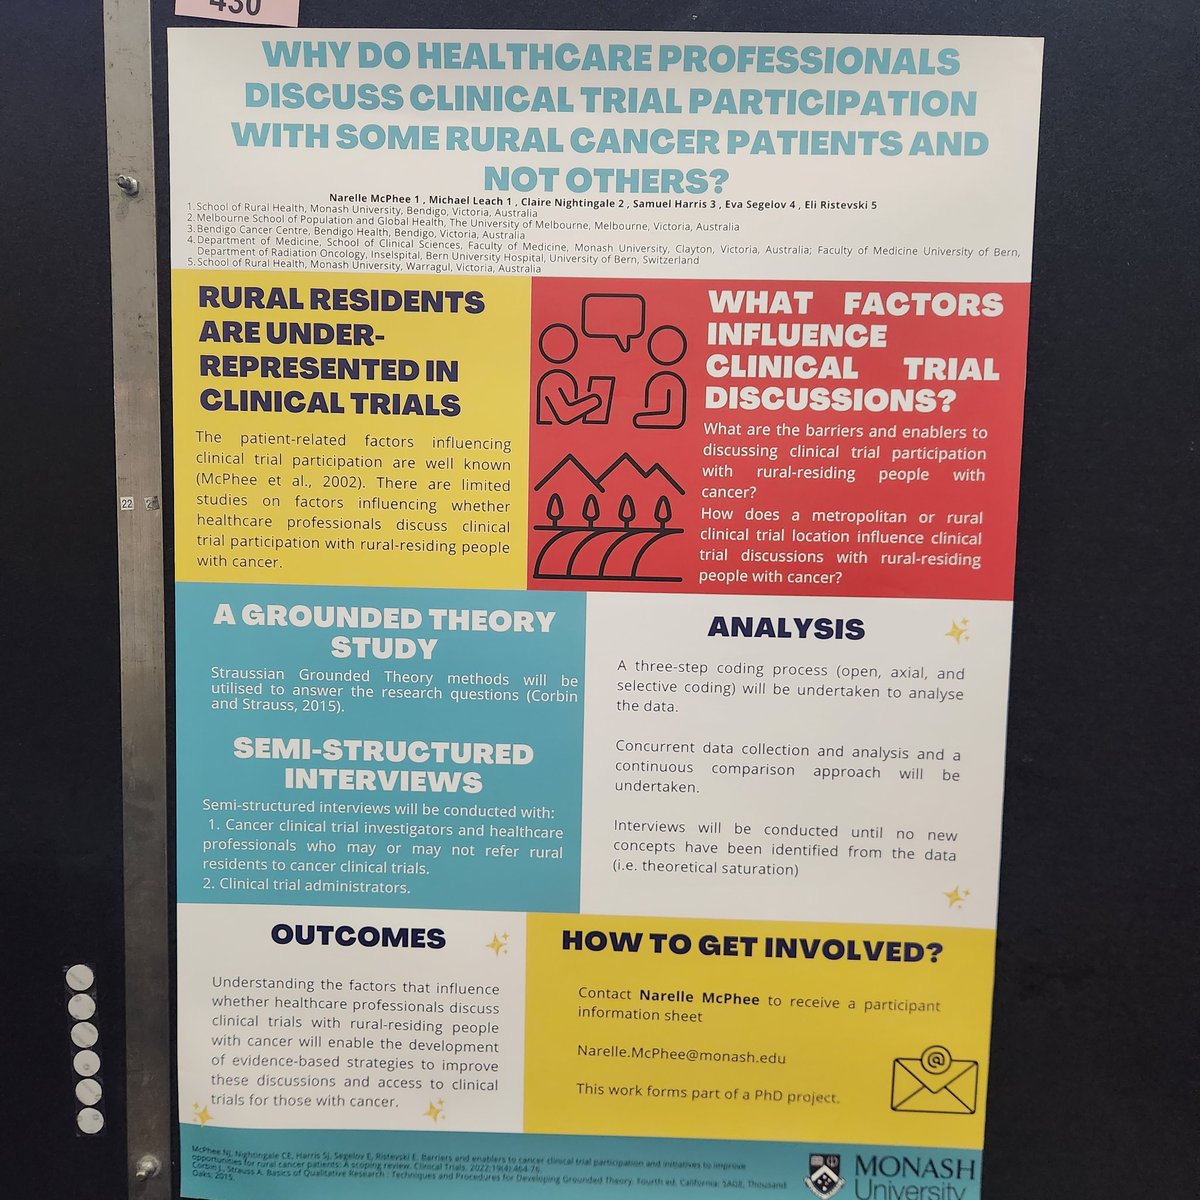 Why do clinicians disccus clinical trials with some rural cancer patients and not others? A Grounded Theory Study. Contact Narelle.McPhee@monash.edu to have your say! #COSA23 #clinicalresearch #clinicaltrial